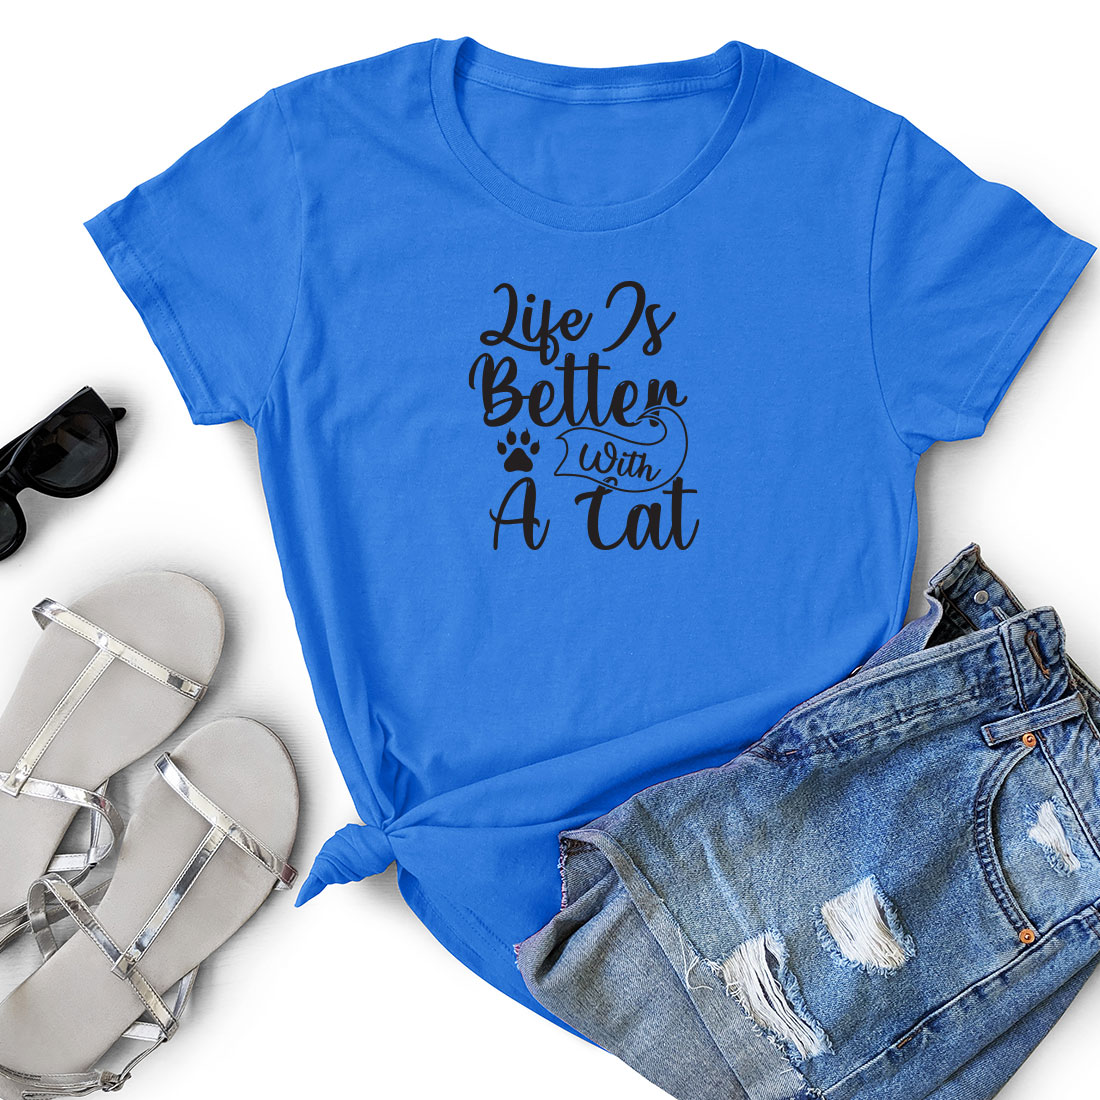 T - shirt that says life is better than a cat.